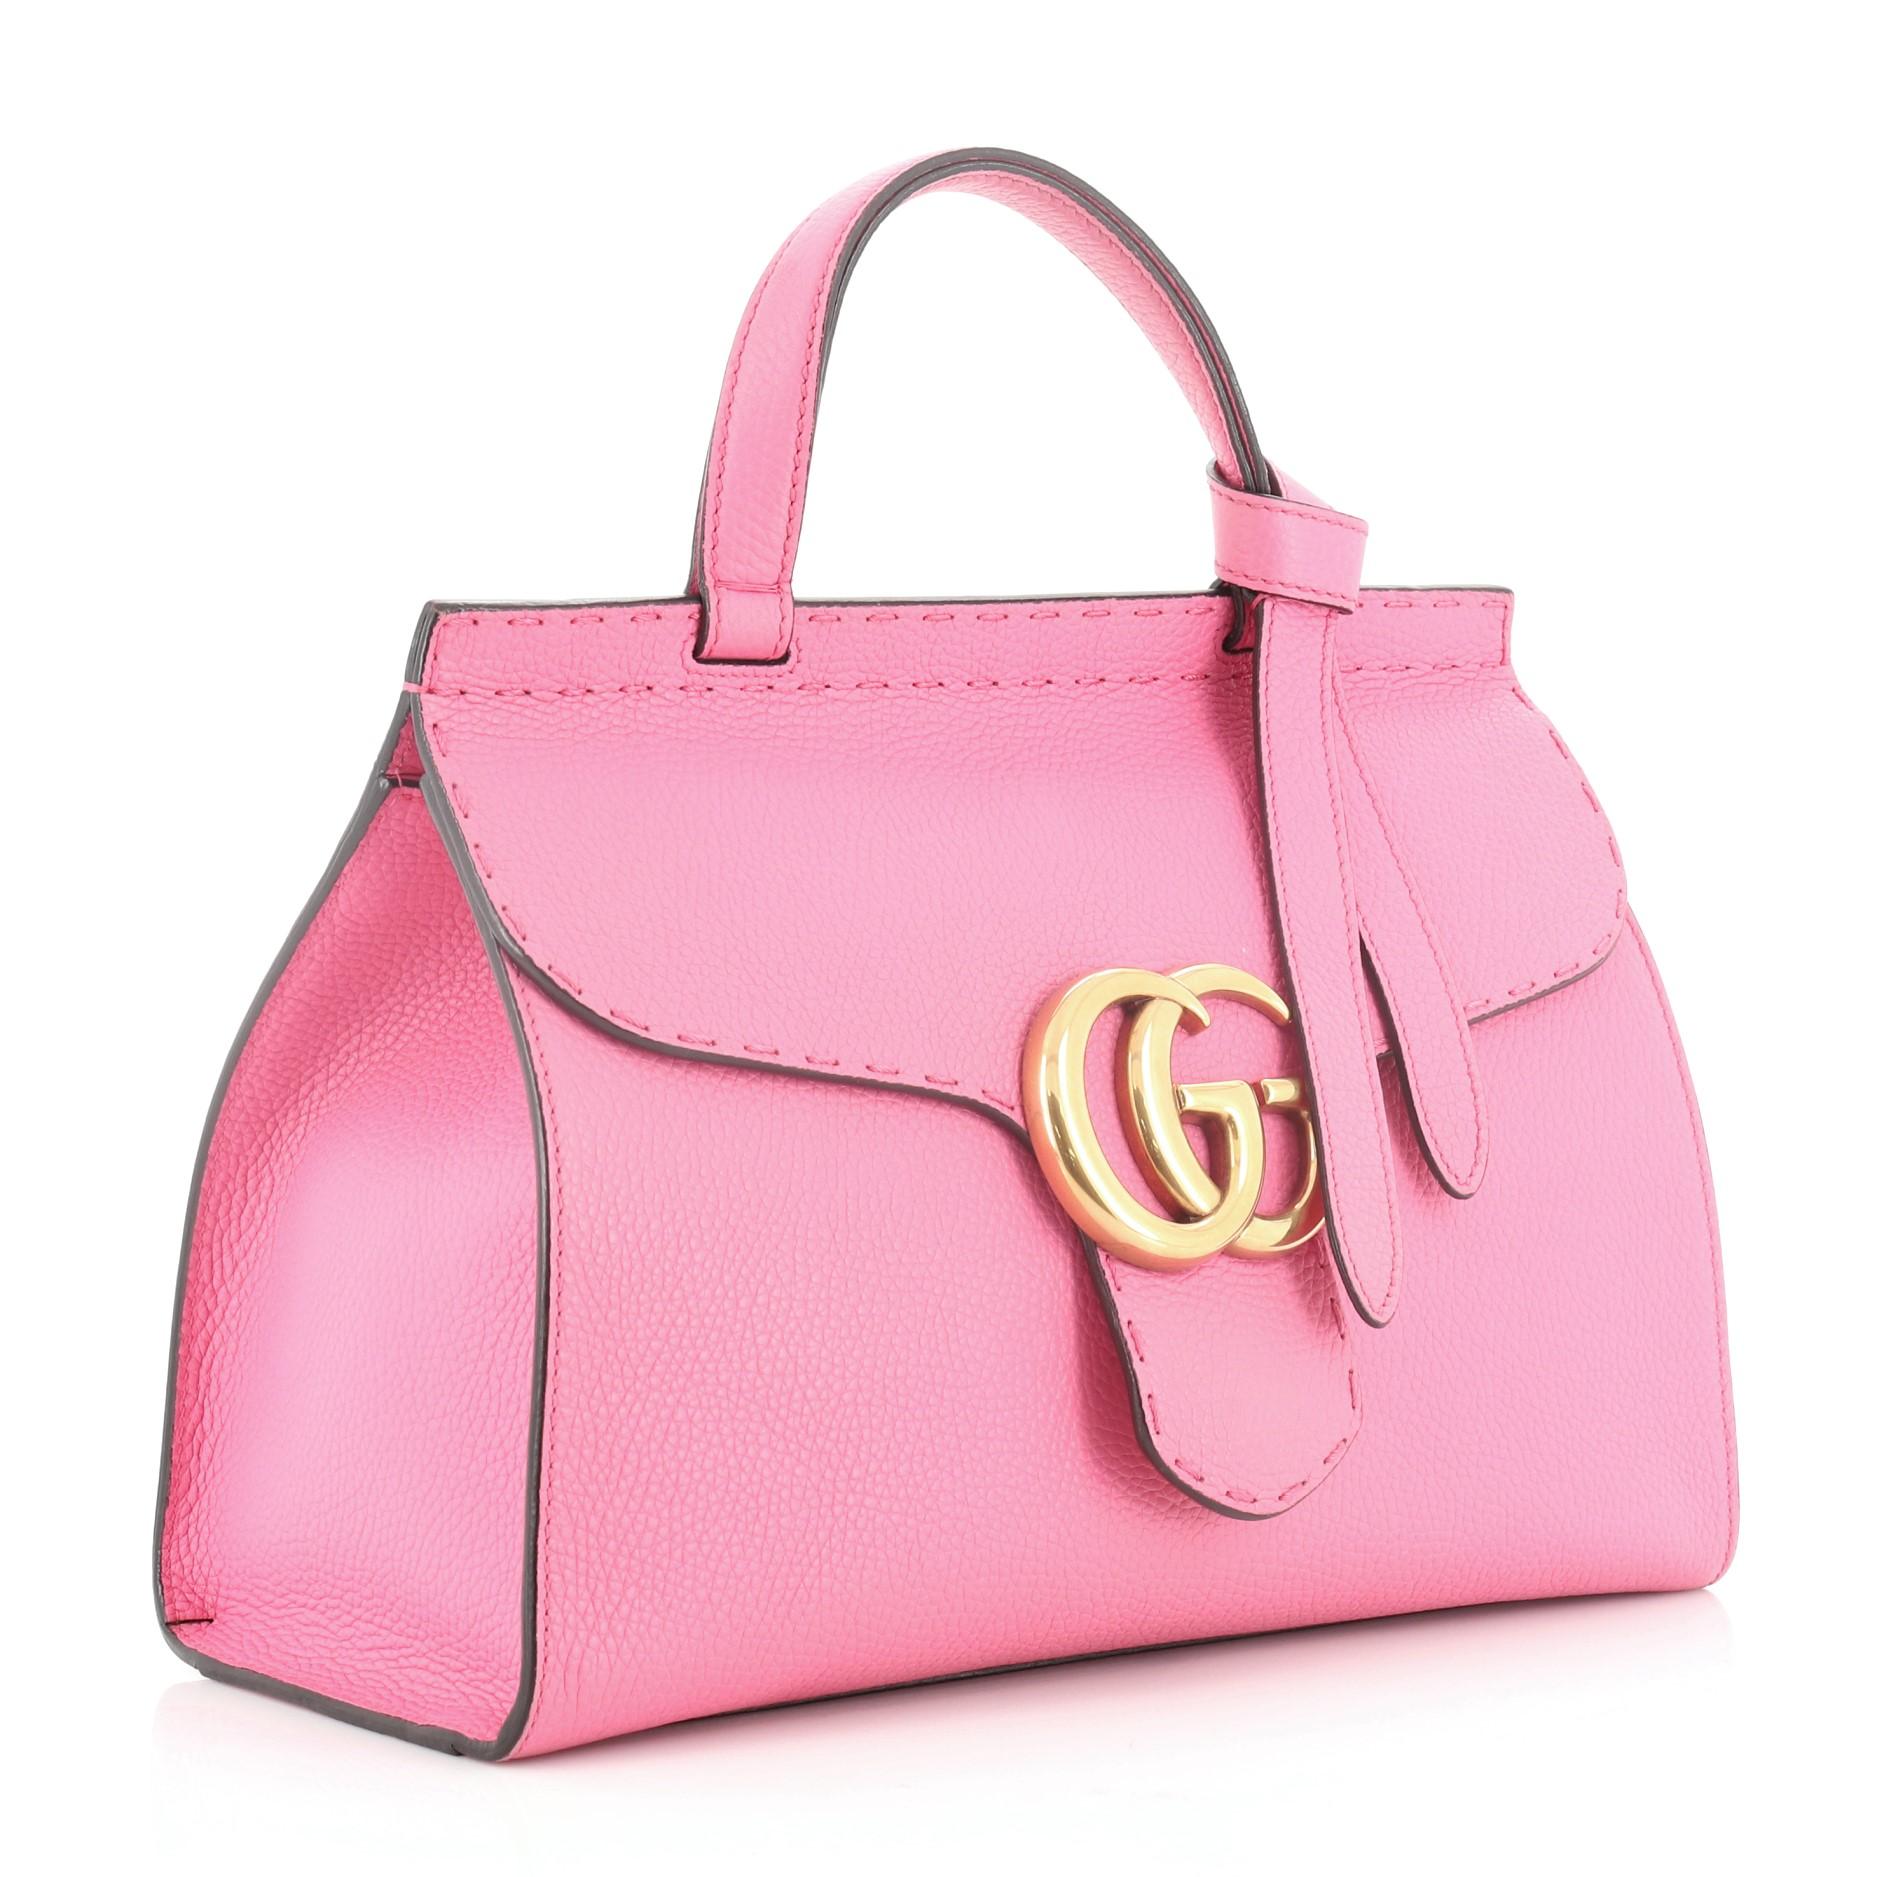 This Gucci GG Marmont Top Handle Bag Leather Small, crafted from pink leather, features a flat leather handle, flap top with GG logo, and aged gold-tone hardware. Its push-lock closure opens to a neutral fabric interior with zip and slip pockets.